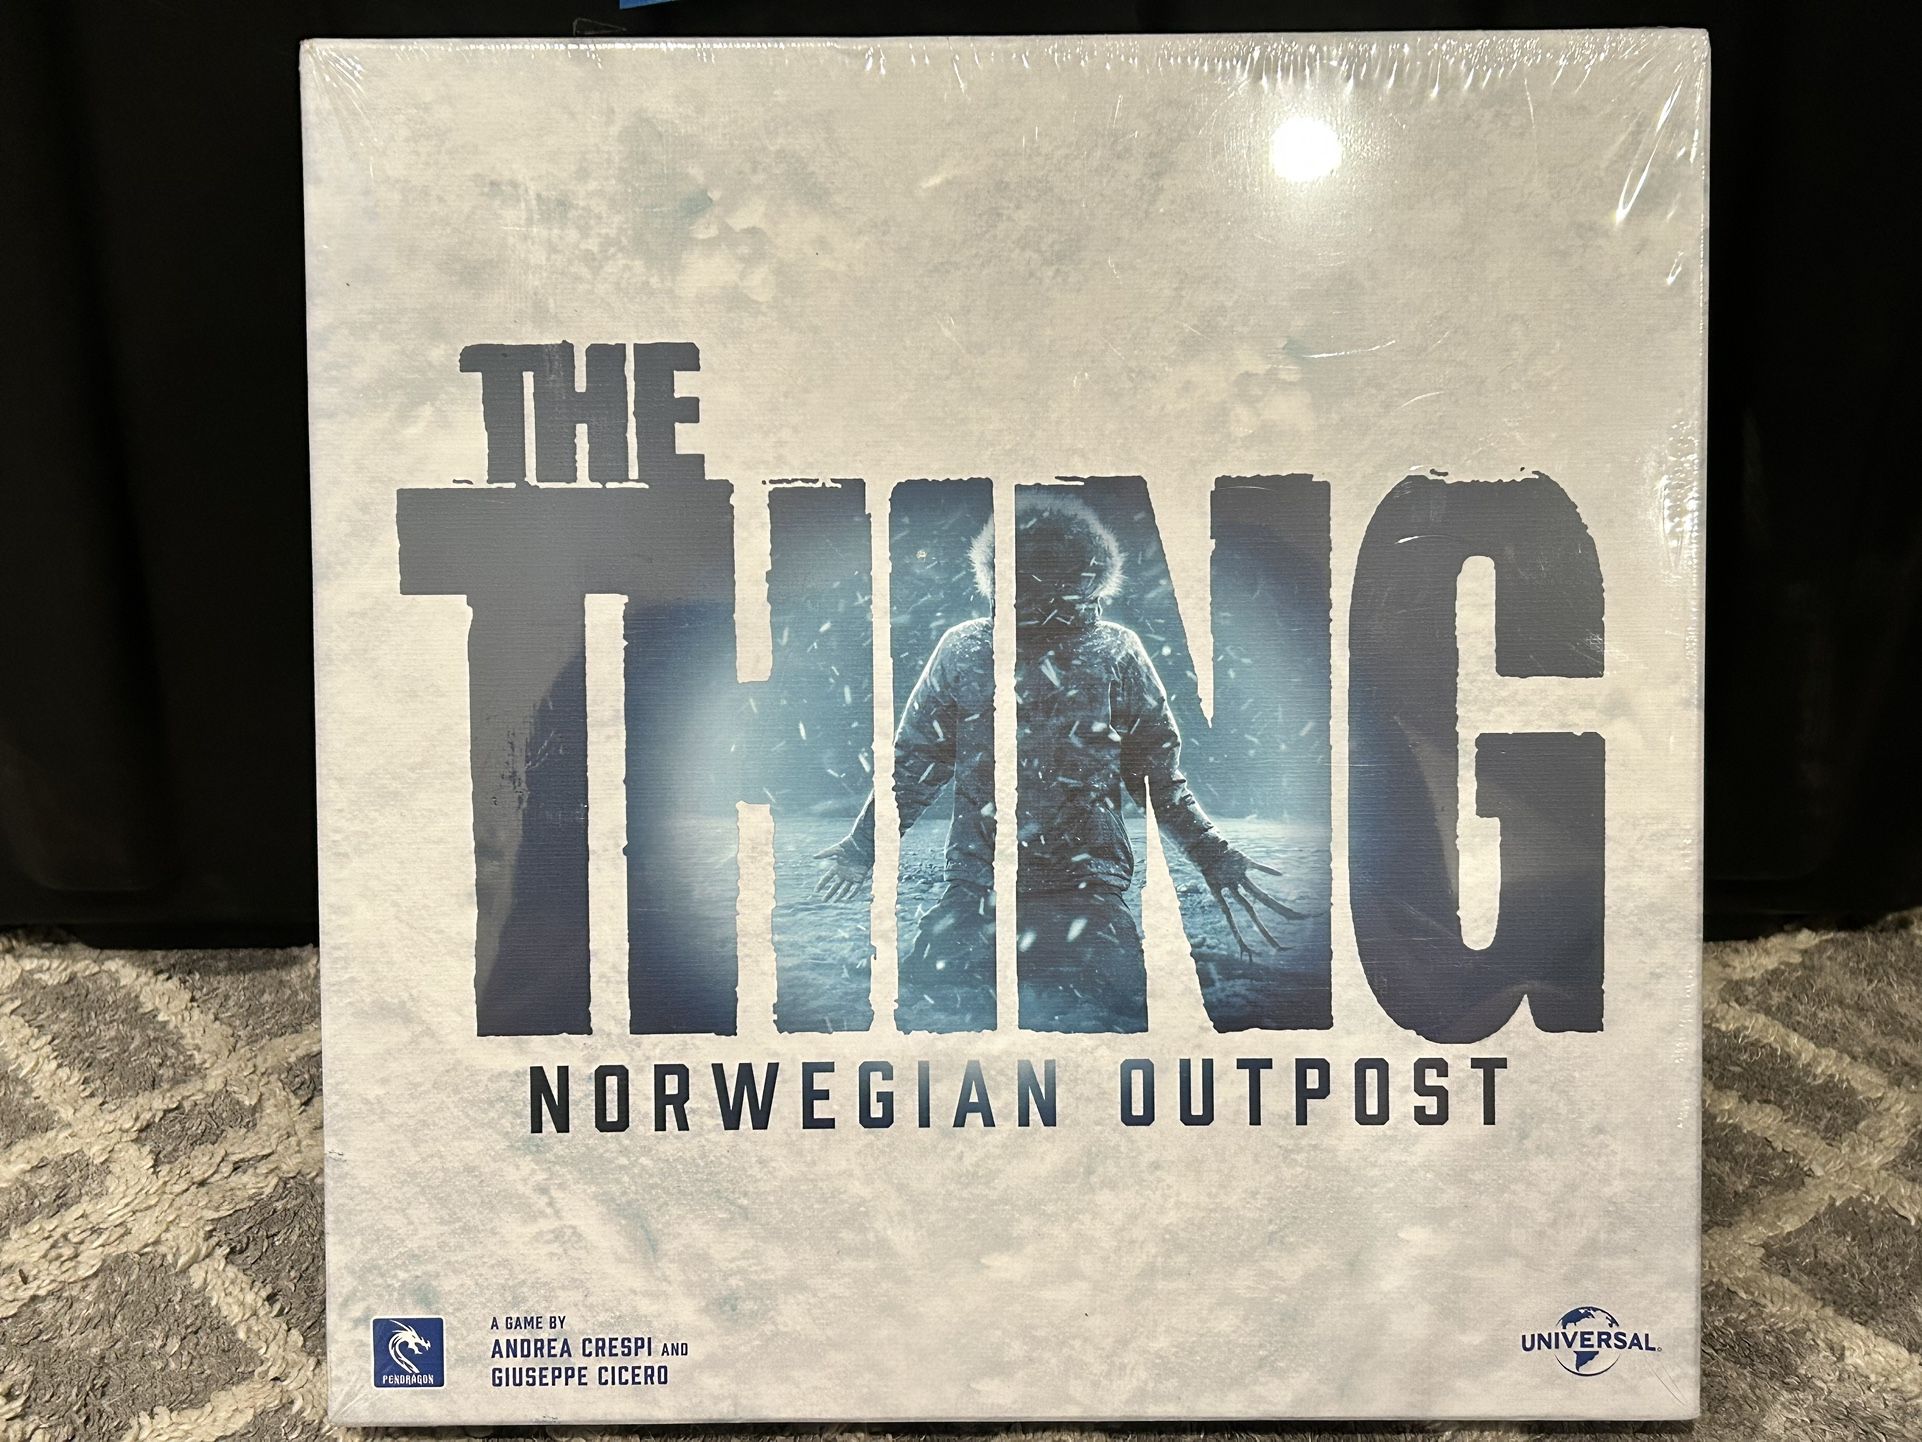 The Thing Board Game Norwegian Outpost